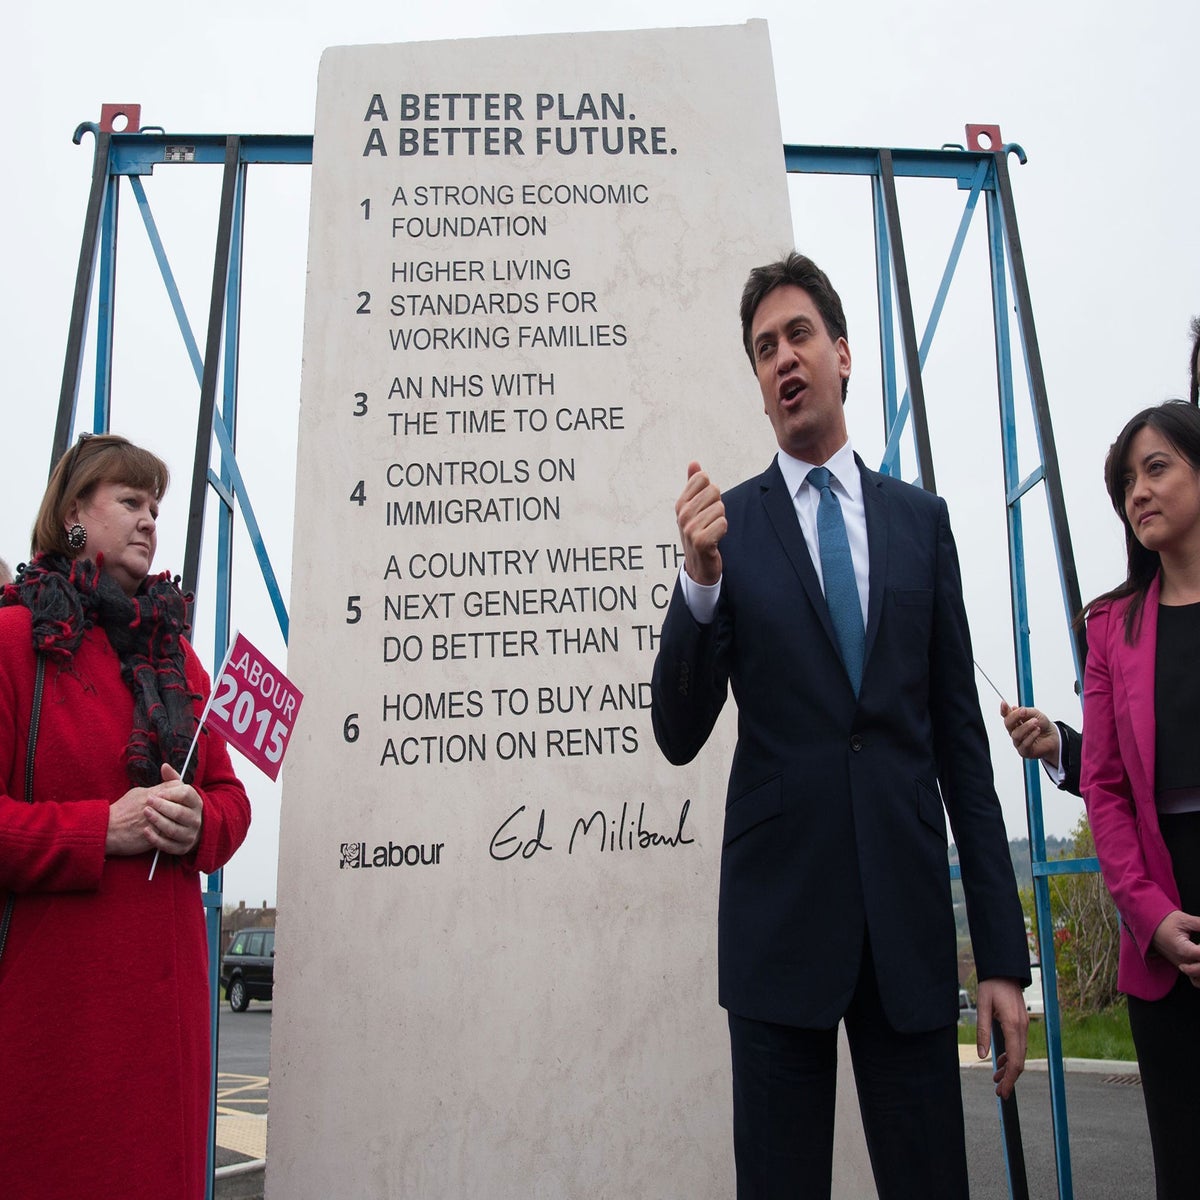 labour-ed-miliband-stone-v2.jpg?width=1200&height=1200&fit=crop